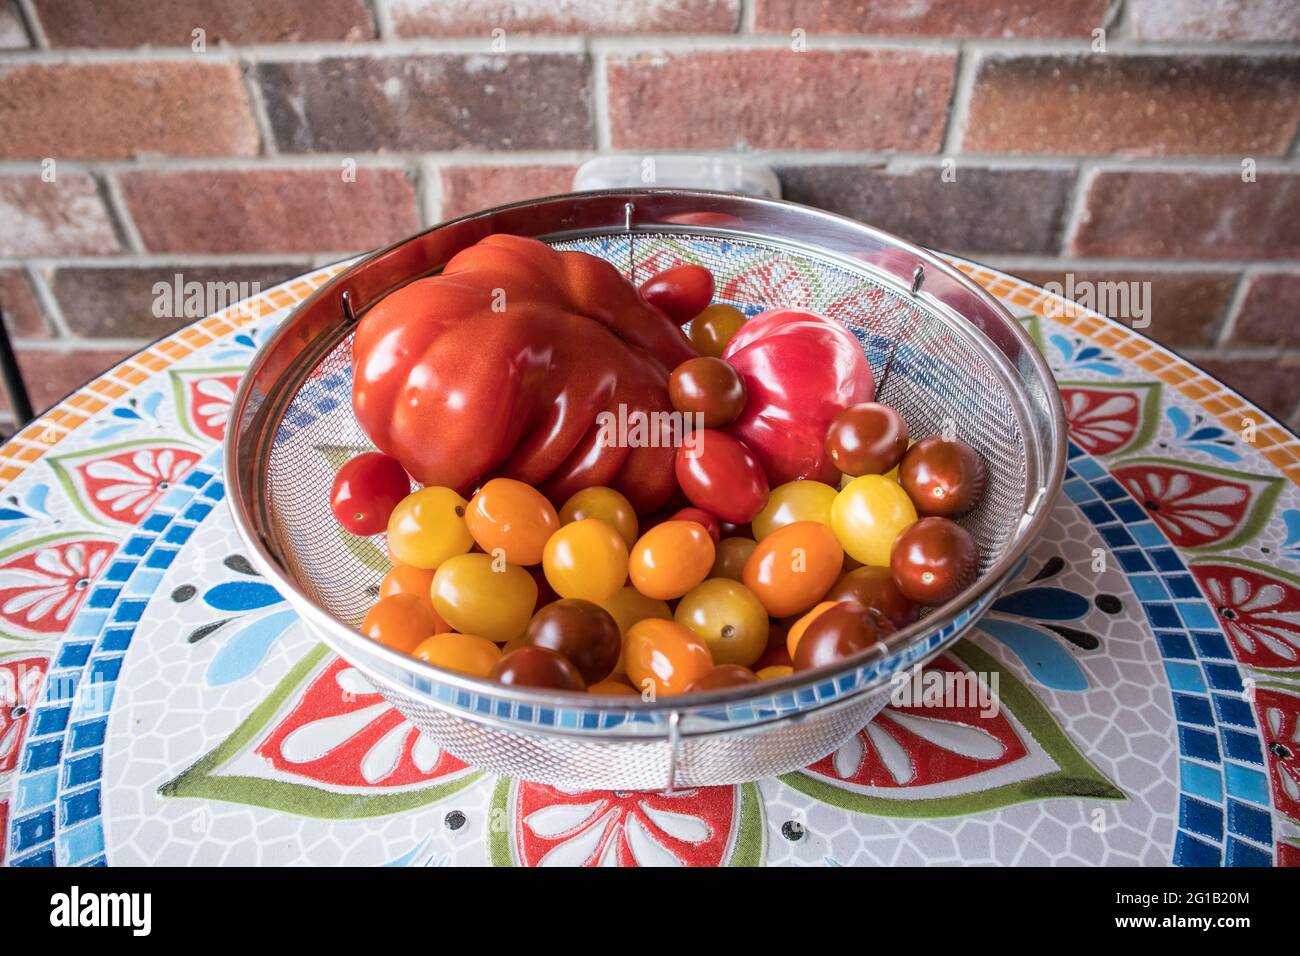 One heirloom tomato among cherry tomatoes on a ceramic table. Stock Photo